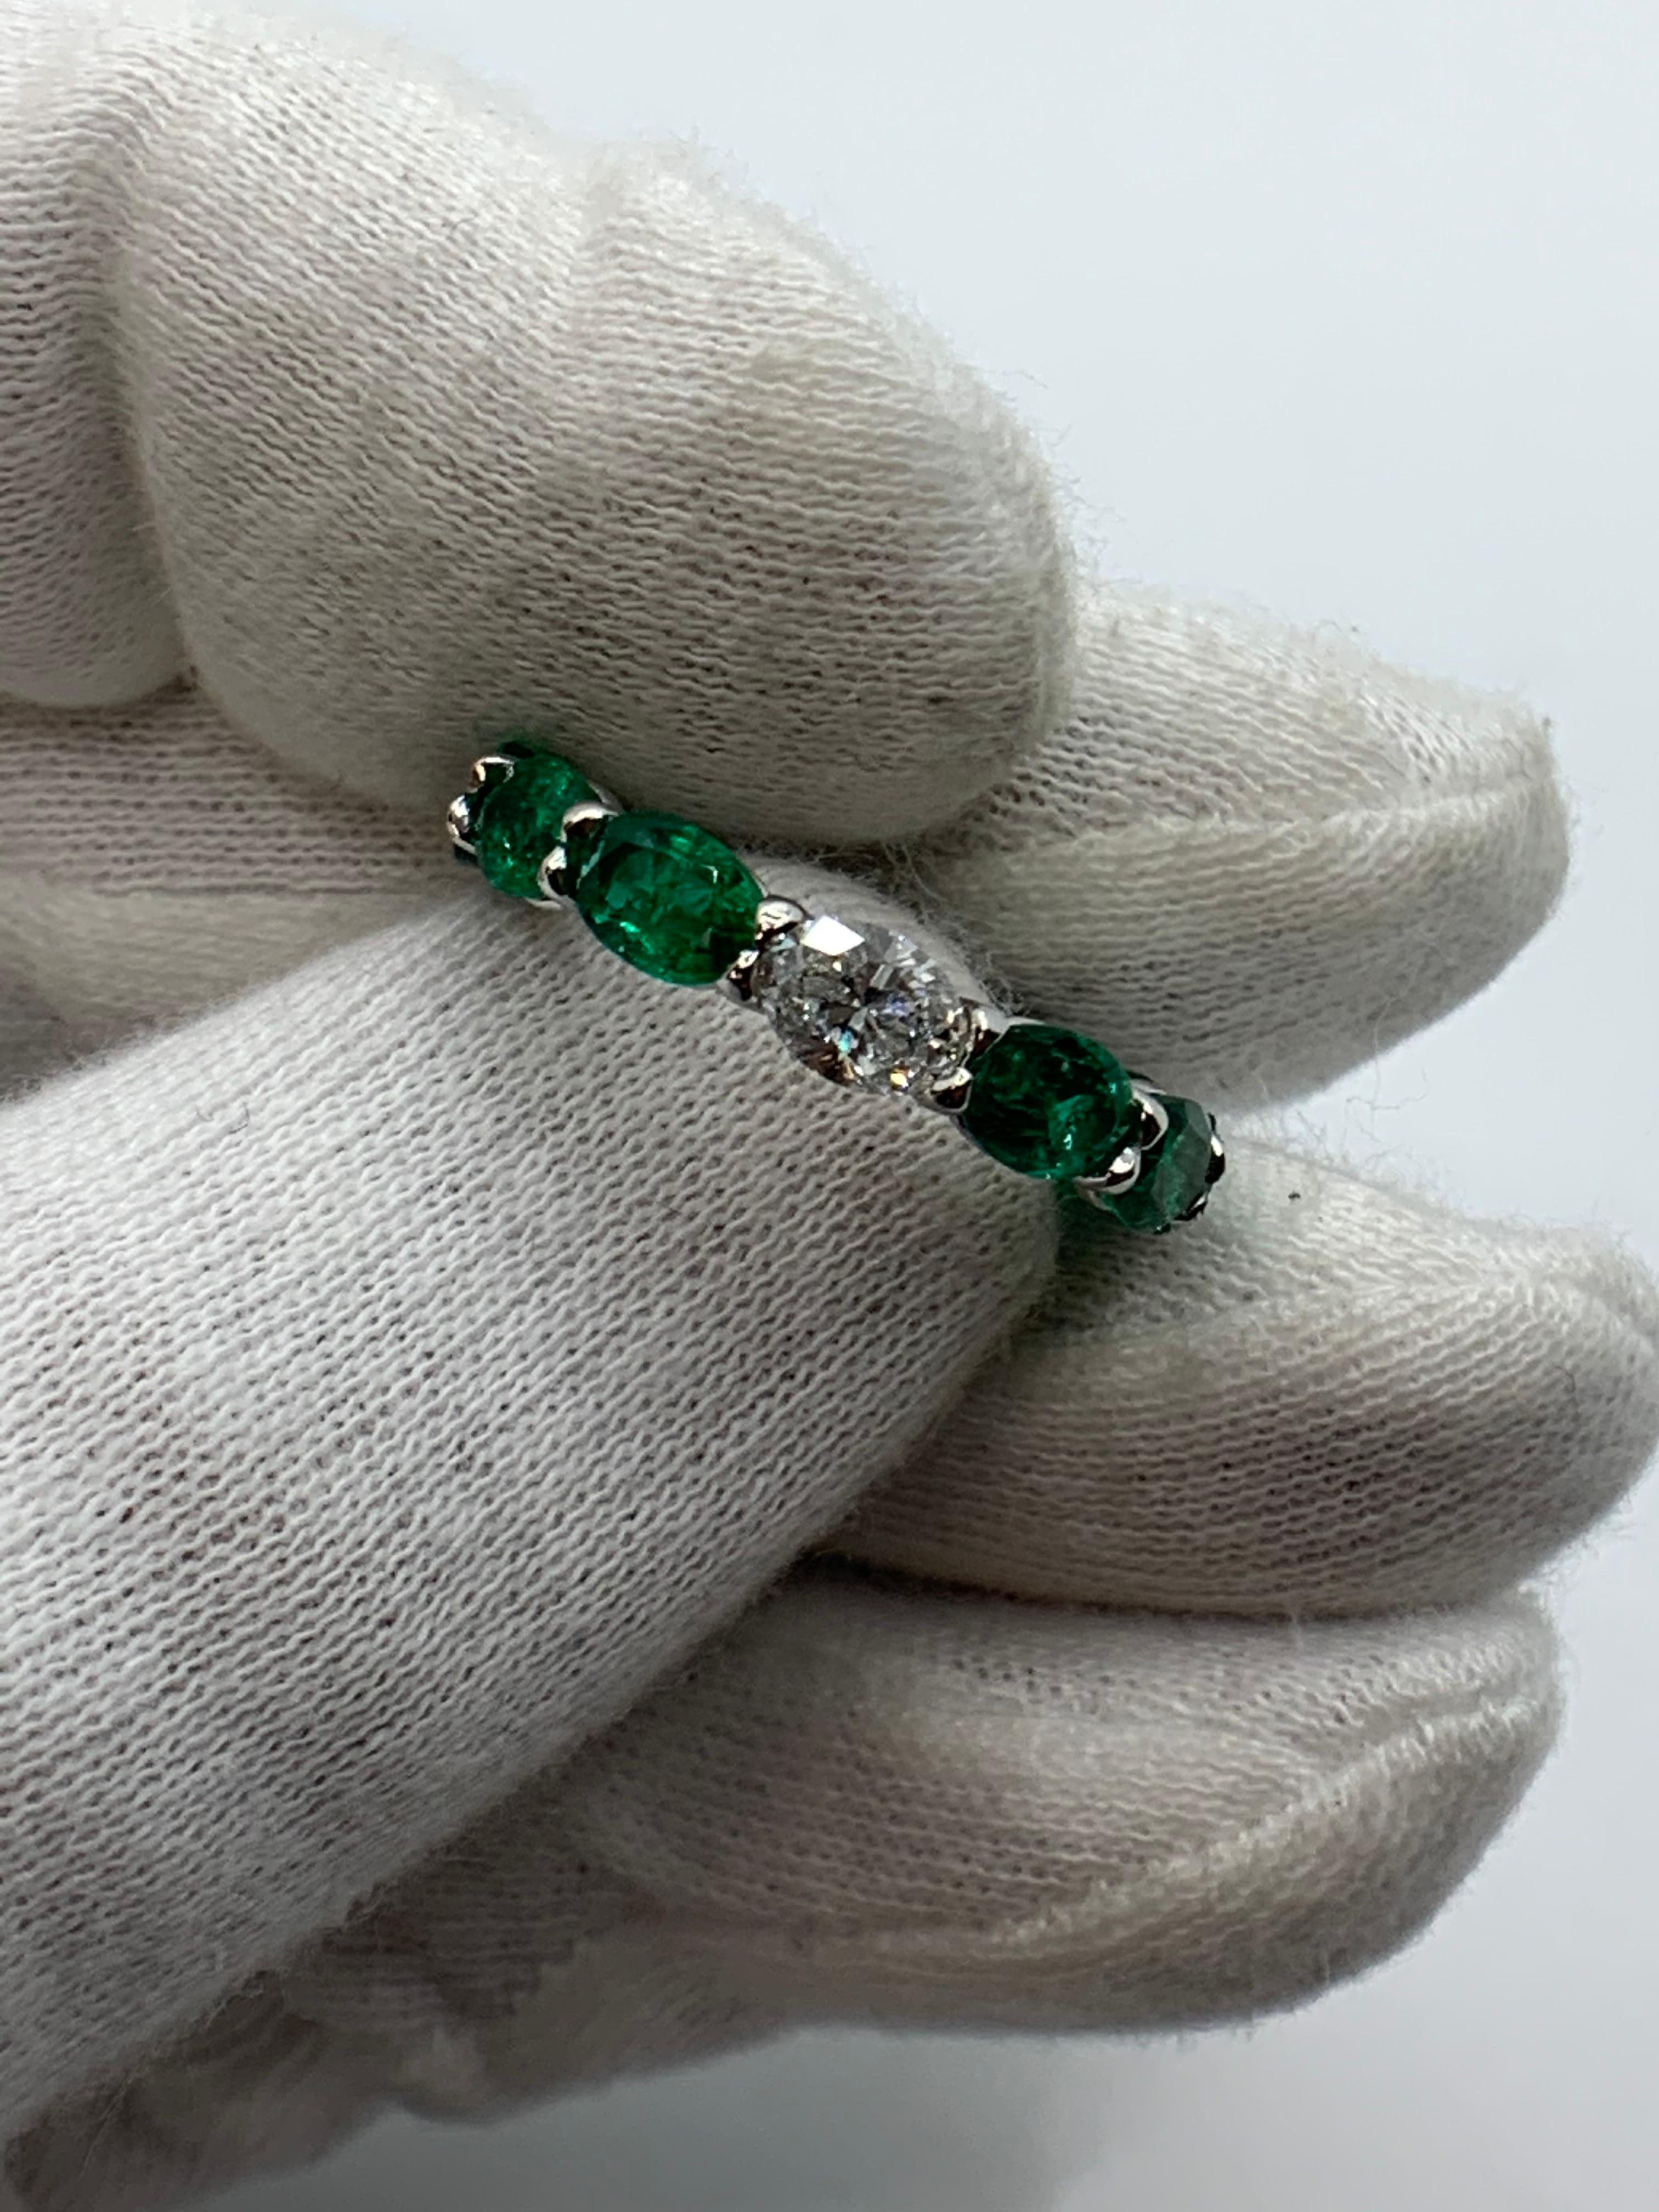 This beautiful Ring features 11 Fine Oval Shaped Emeralds weighing 5.30 Carats with 1 Oval Diamond weighing 0.51 Carat that can be worn Diamond side up or down. Set in Platinum.
Finger Size 6.5.
Can be resized.
Also available in other Gemstones.